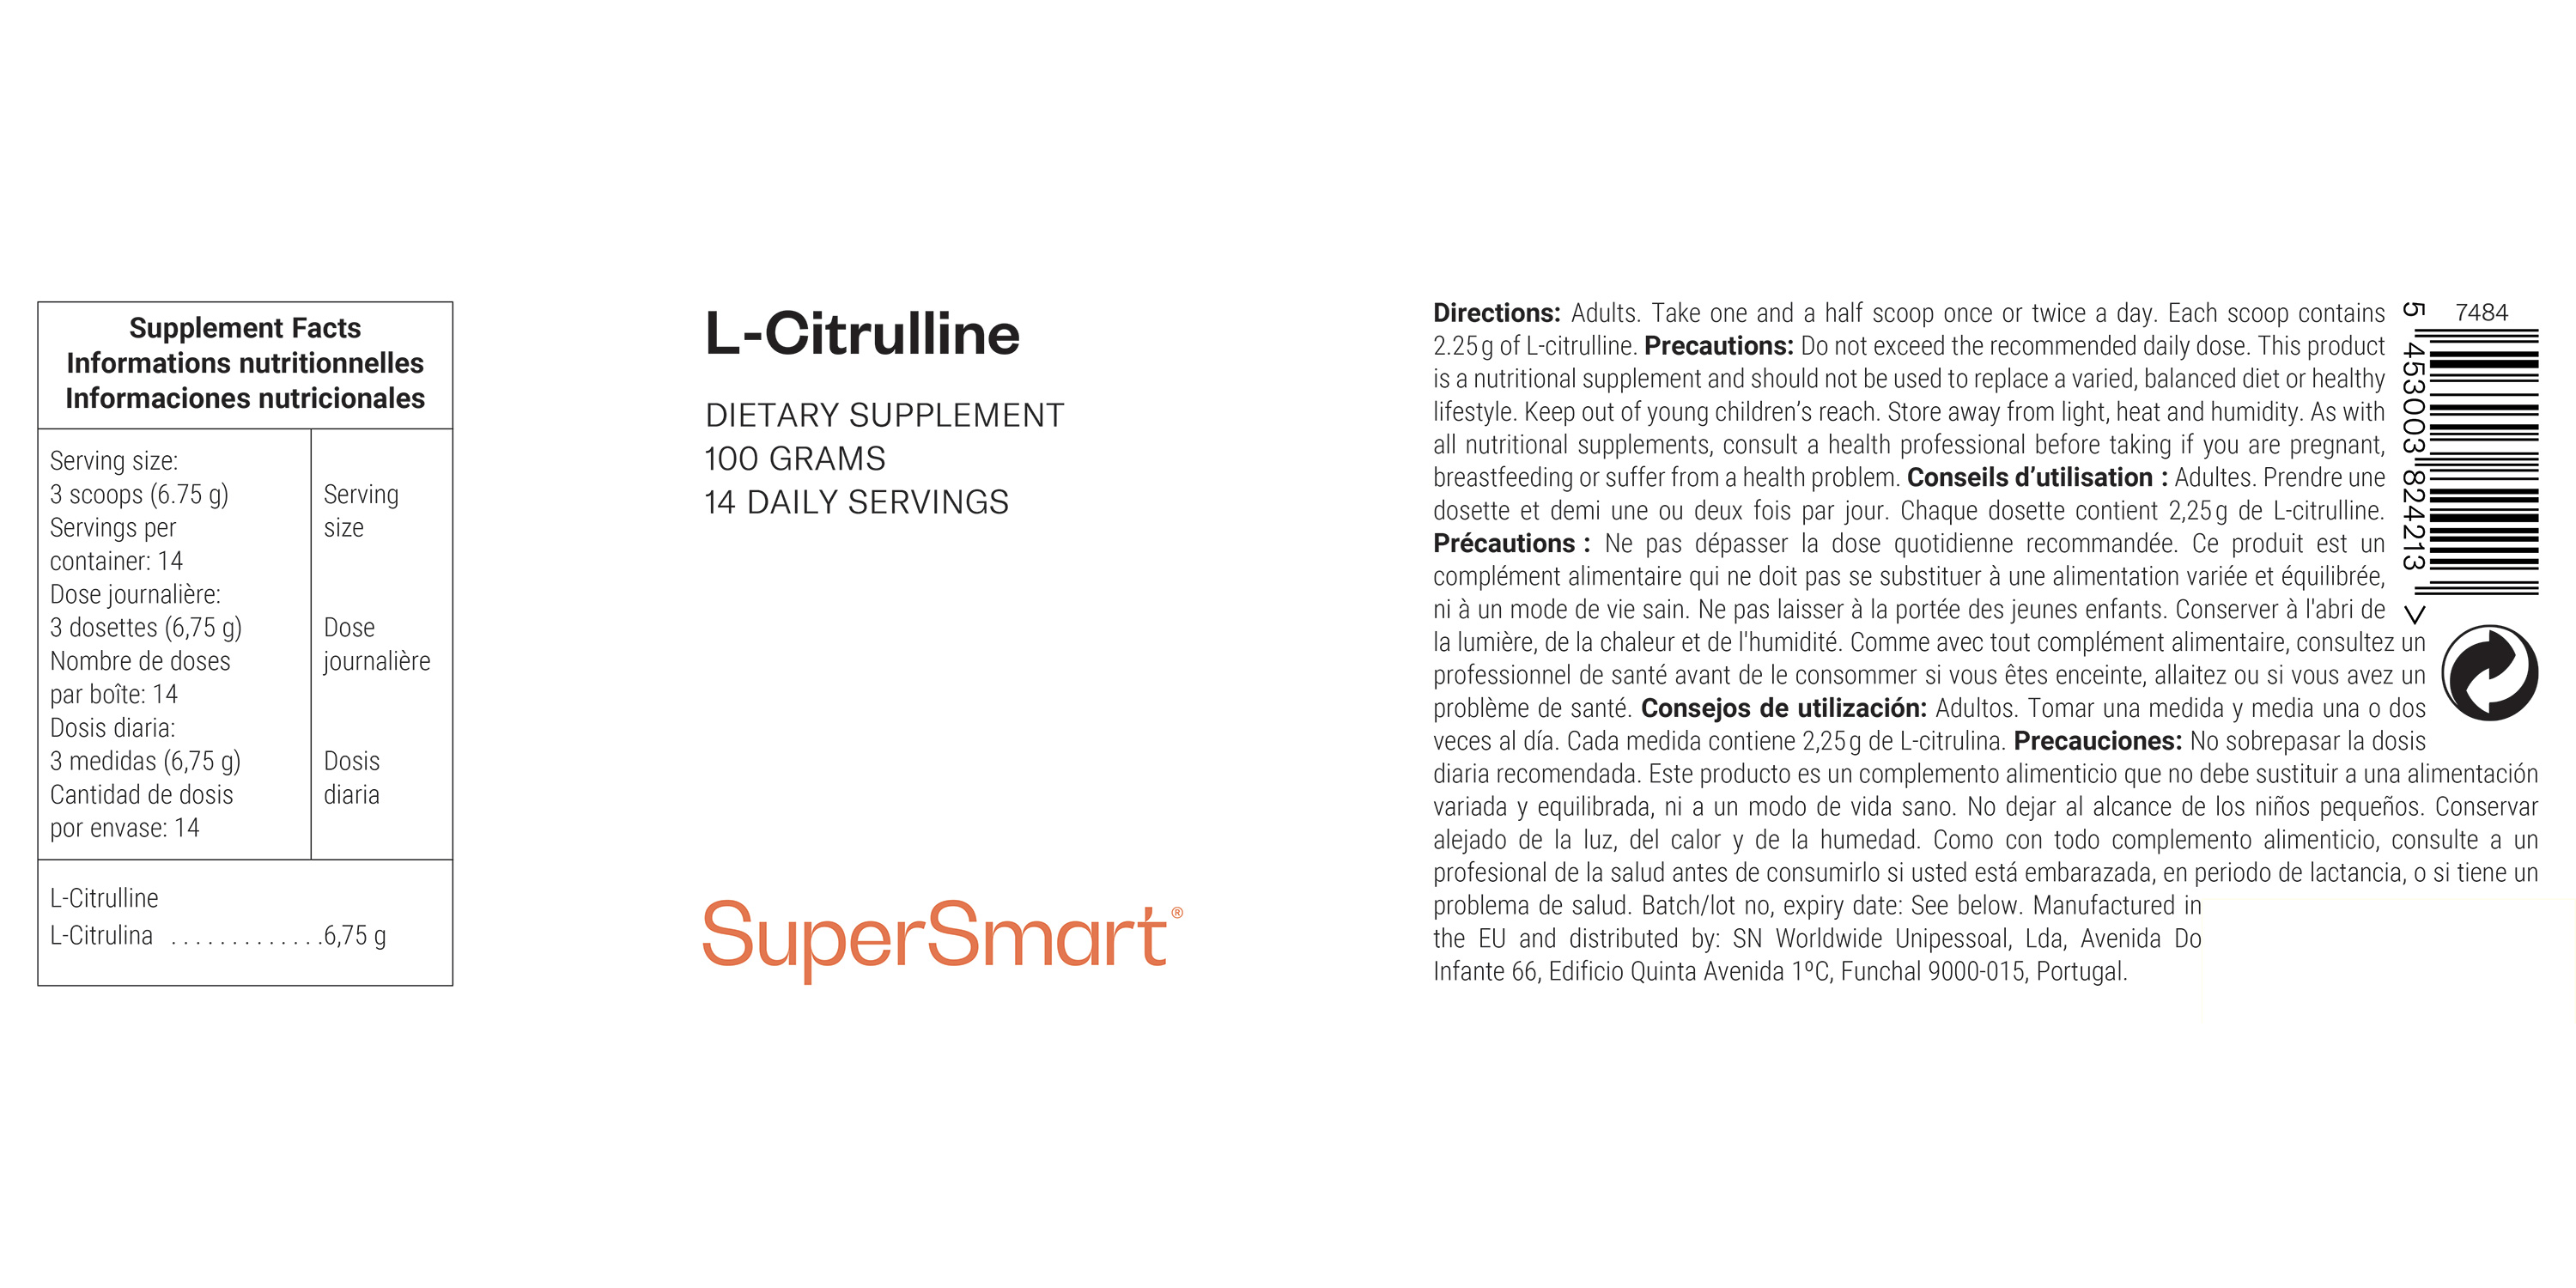 Dietary supplement containing L-Citrulline